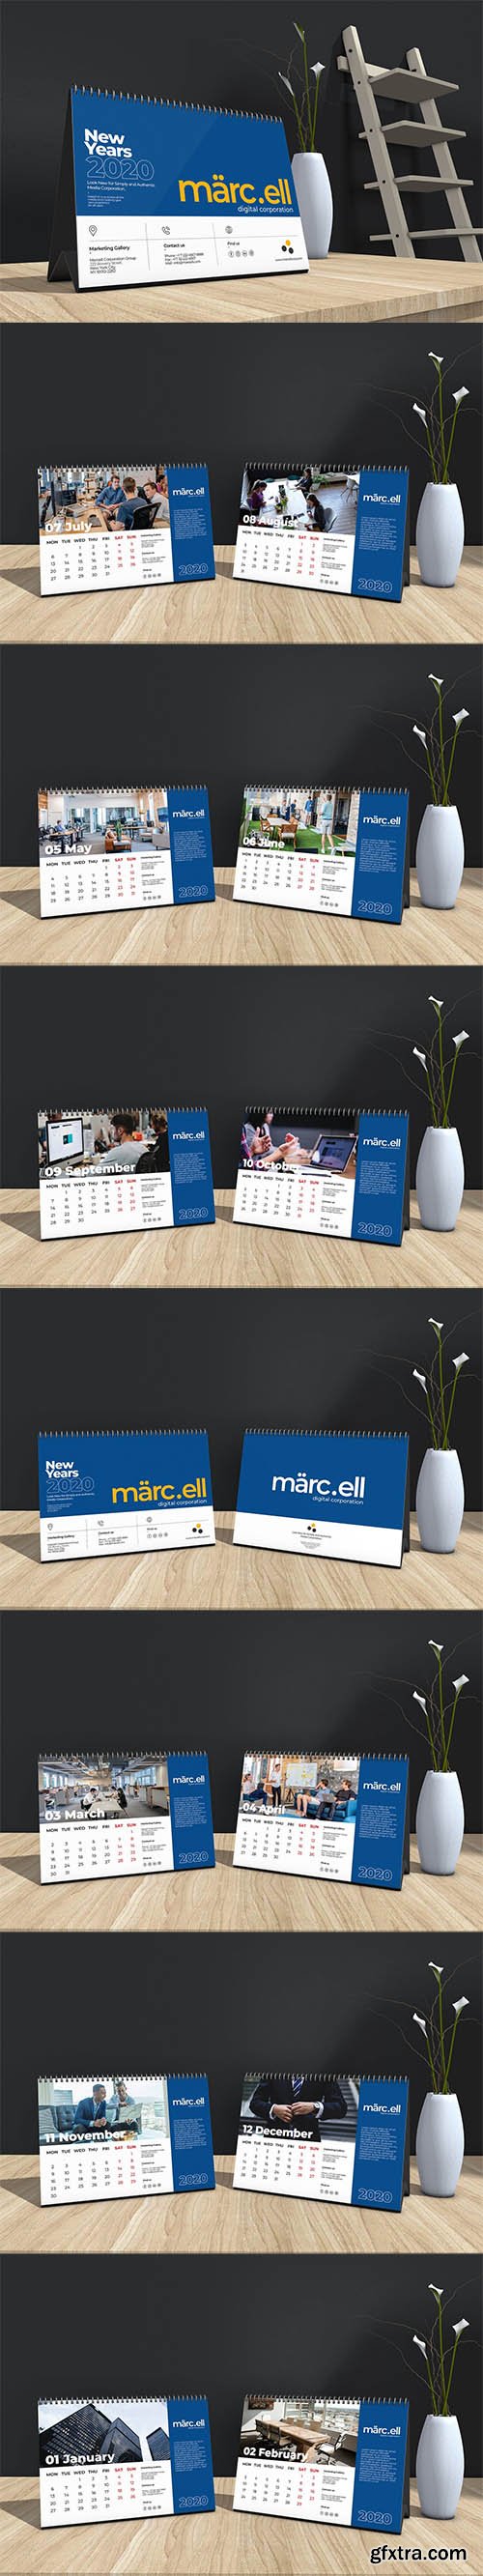 Marcell Corporate Table Calendar 2020